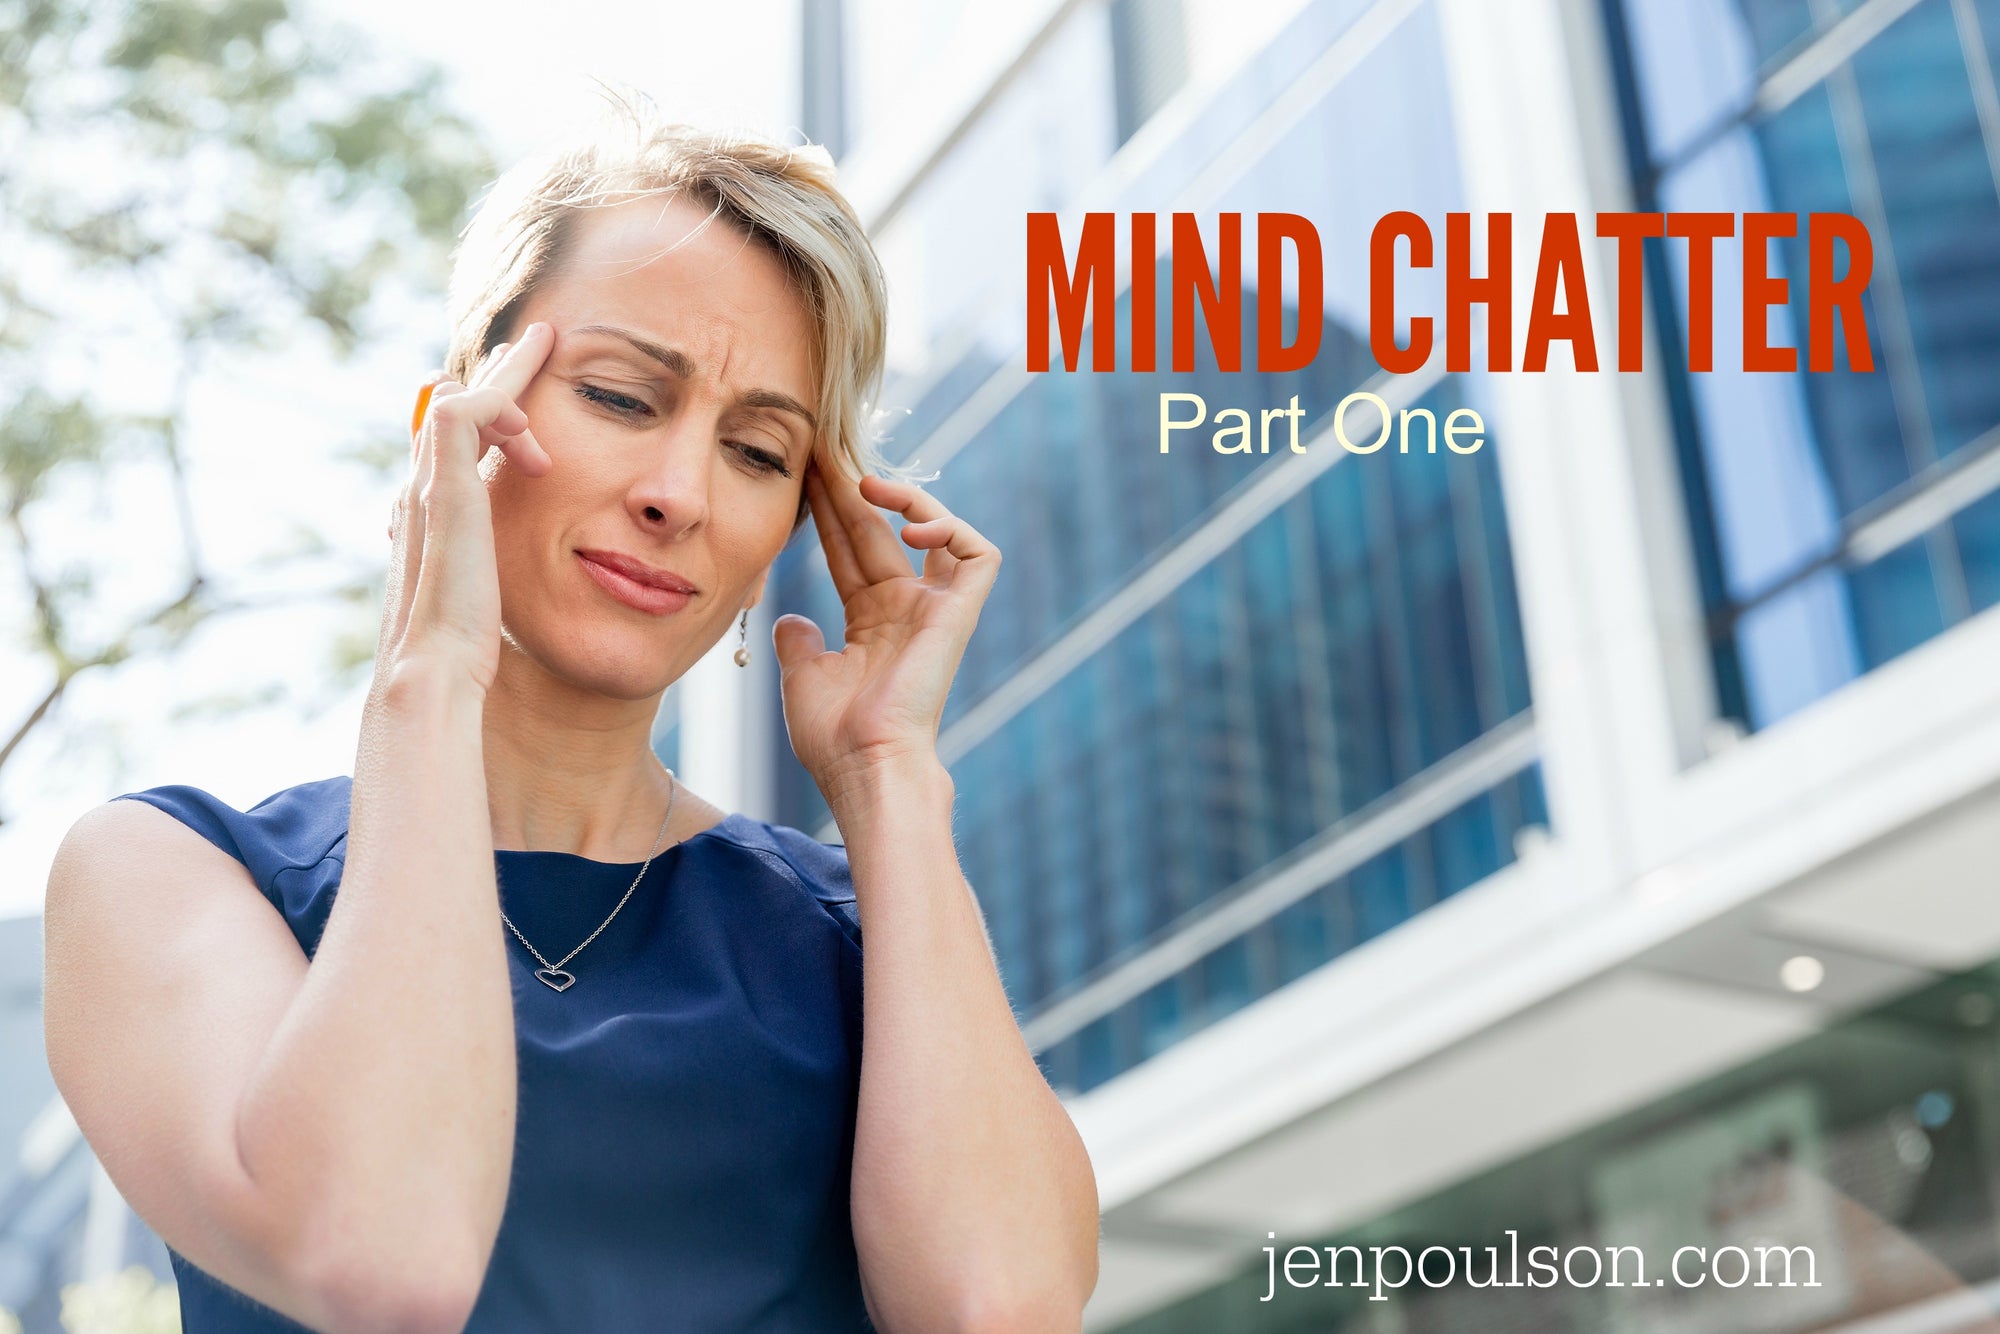 Mind Chatter - 3 Simple Steps to Clean it Up! (Part 1)